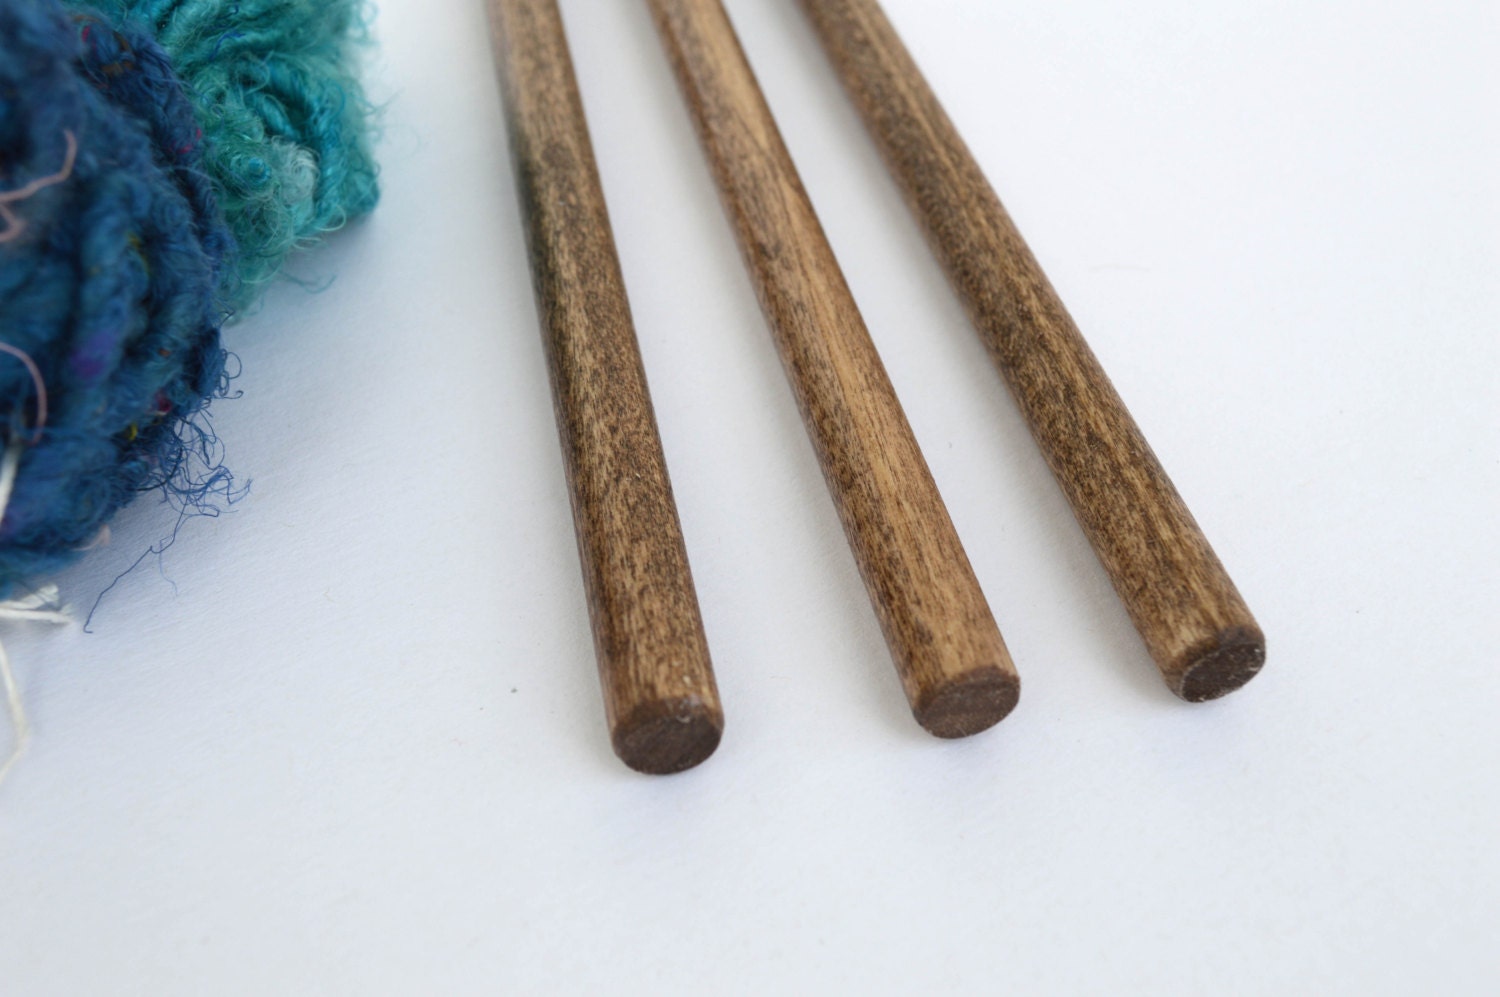 Oak Wooden Dowel 1/2 Inch Diameter by 7 Inch Length Unfinished Solid Wood 